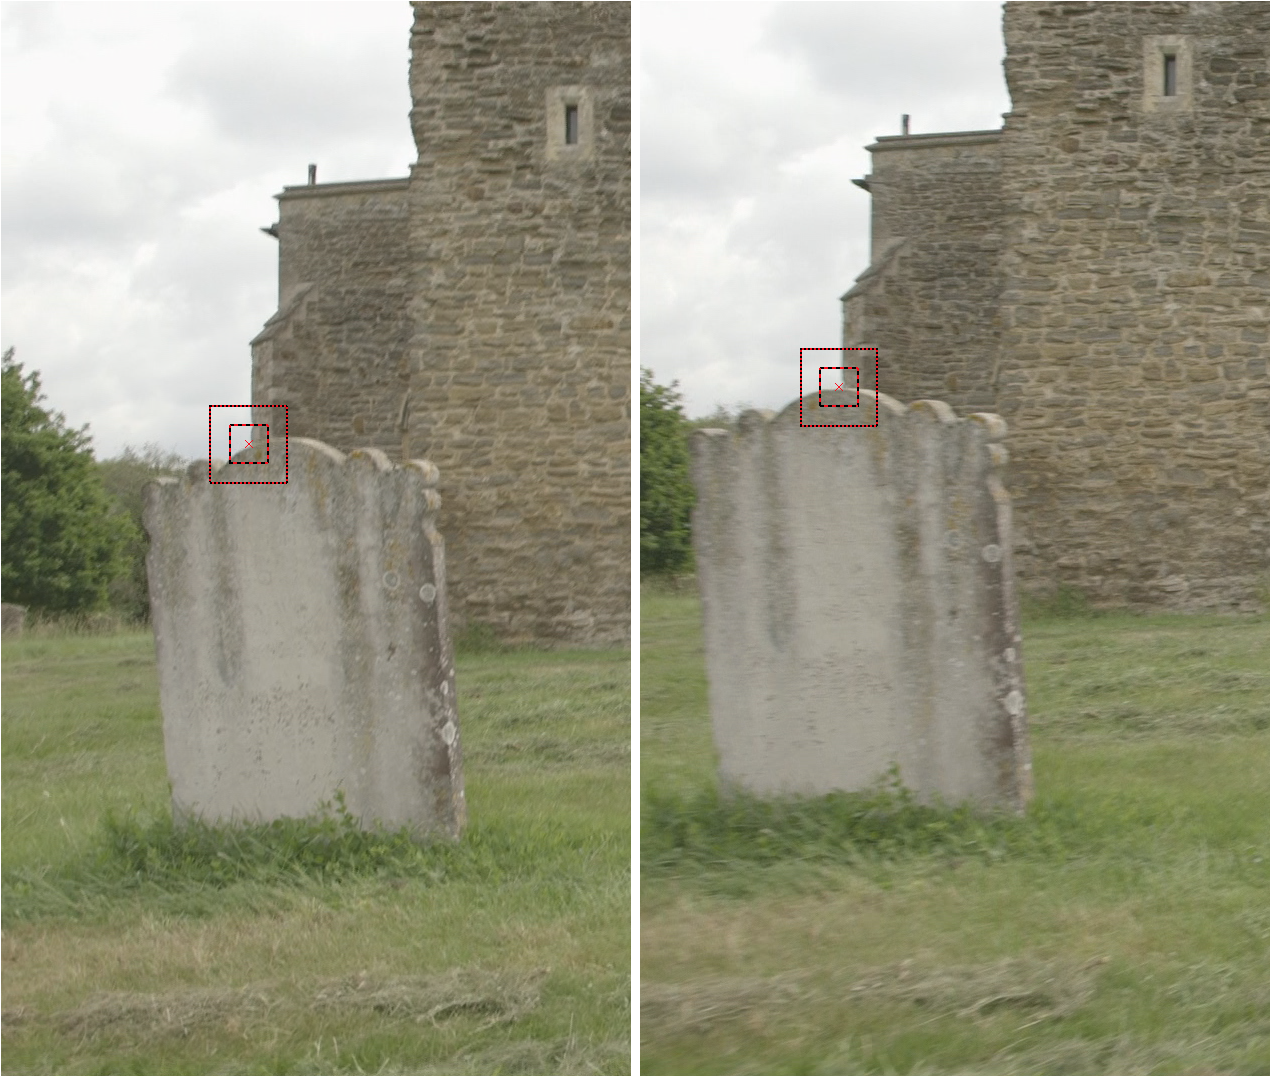 a side by side image showing false corners